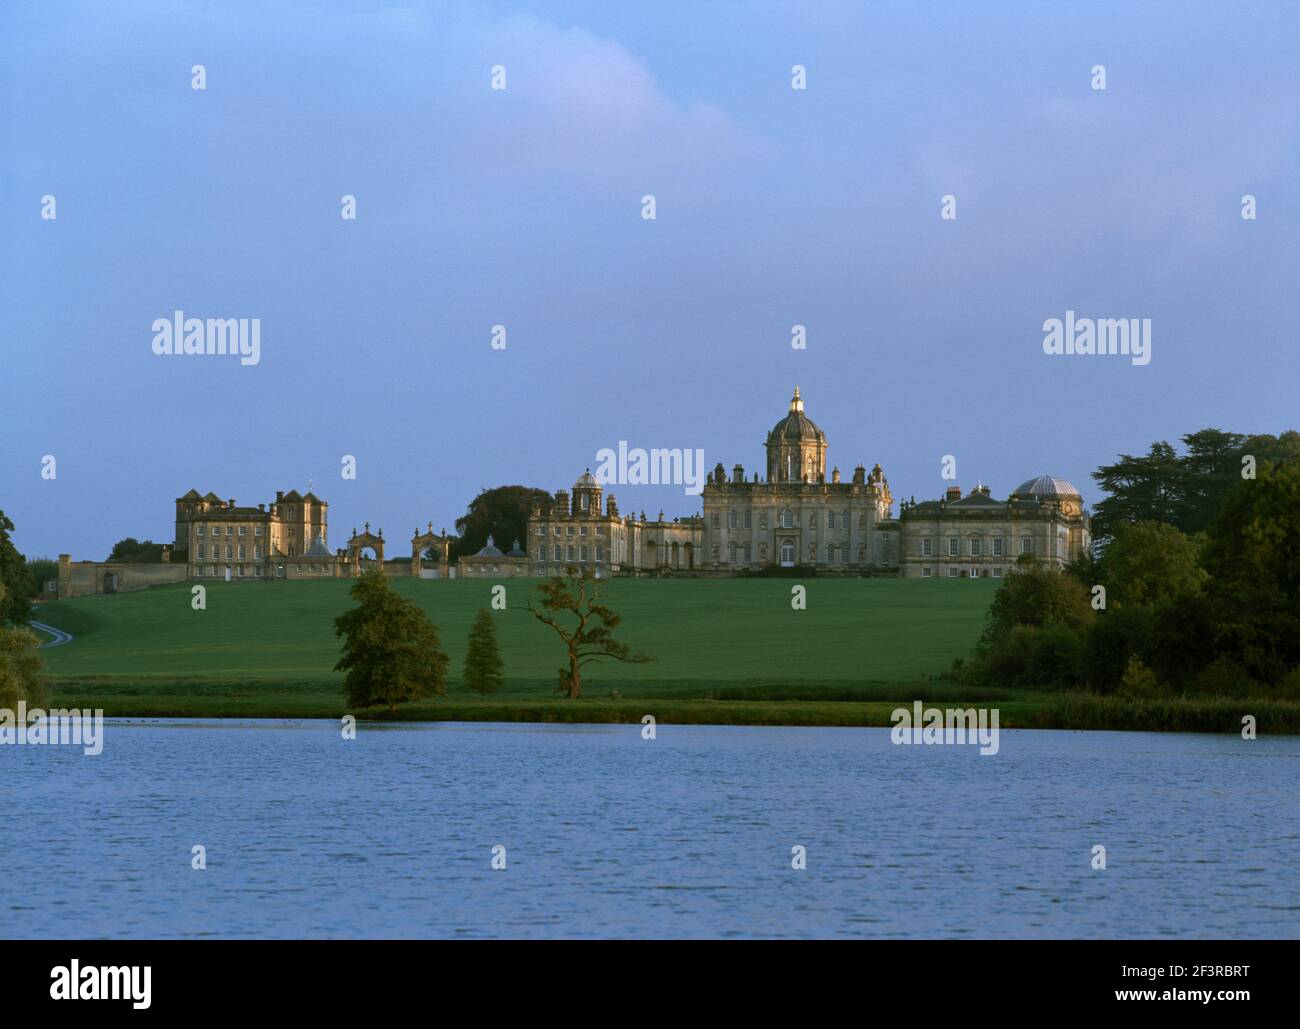 North side of lake and stately home of English baroque style Castle Howard, built by Sir John Vanbrugh from 1699 to 1712, North Yorkshire Stock Photo